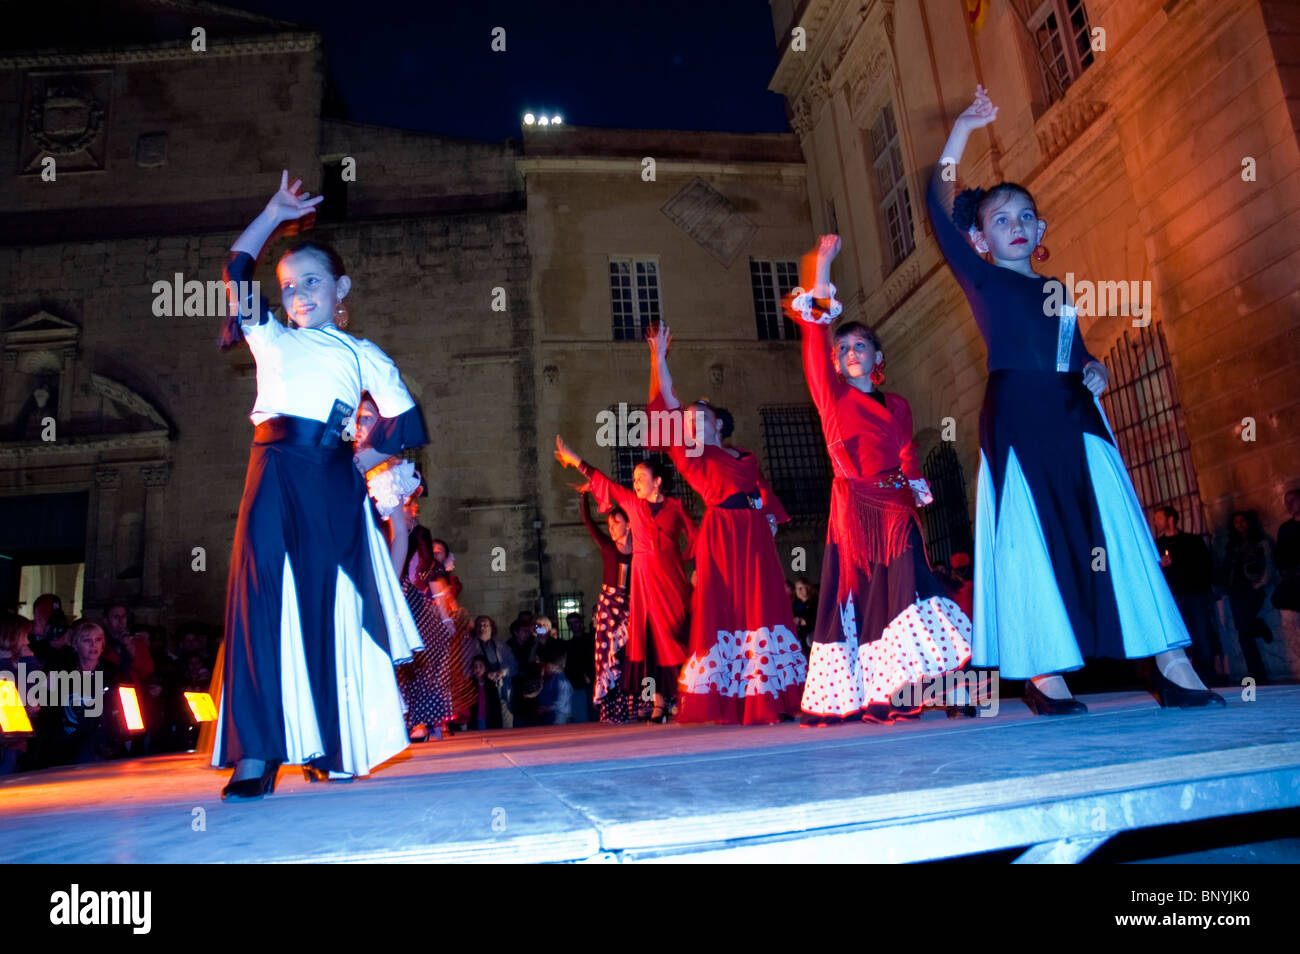 Arles, France, Feria "Bullfighting Festival" Andalusian Women Performing on Stage Flamenco Dance in Costume, teenagers dancing Stock Photo